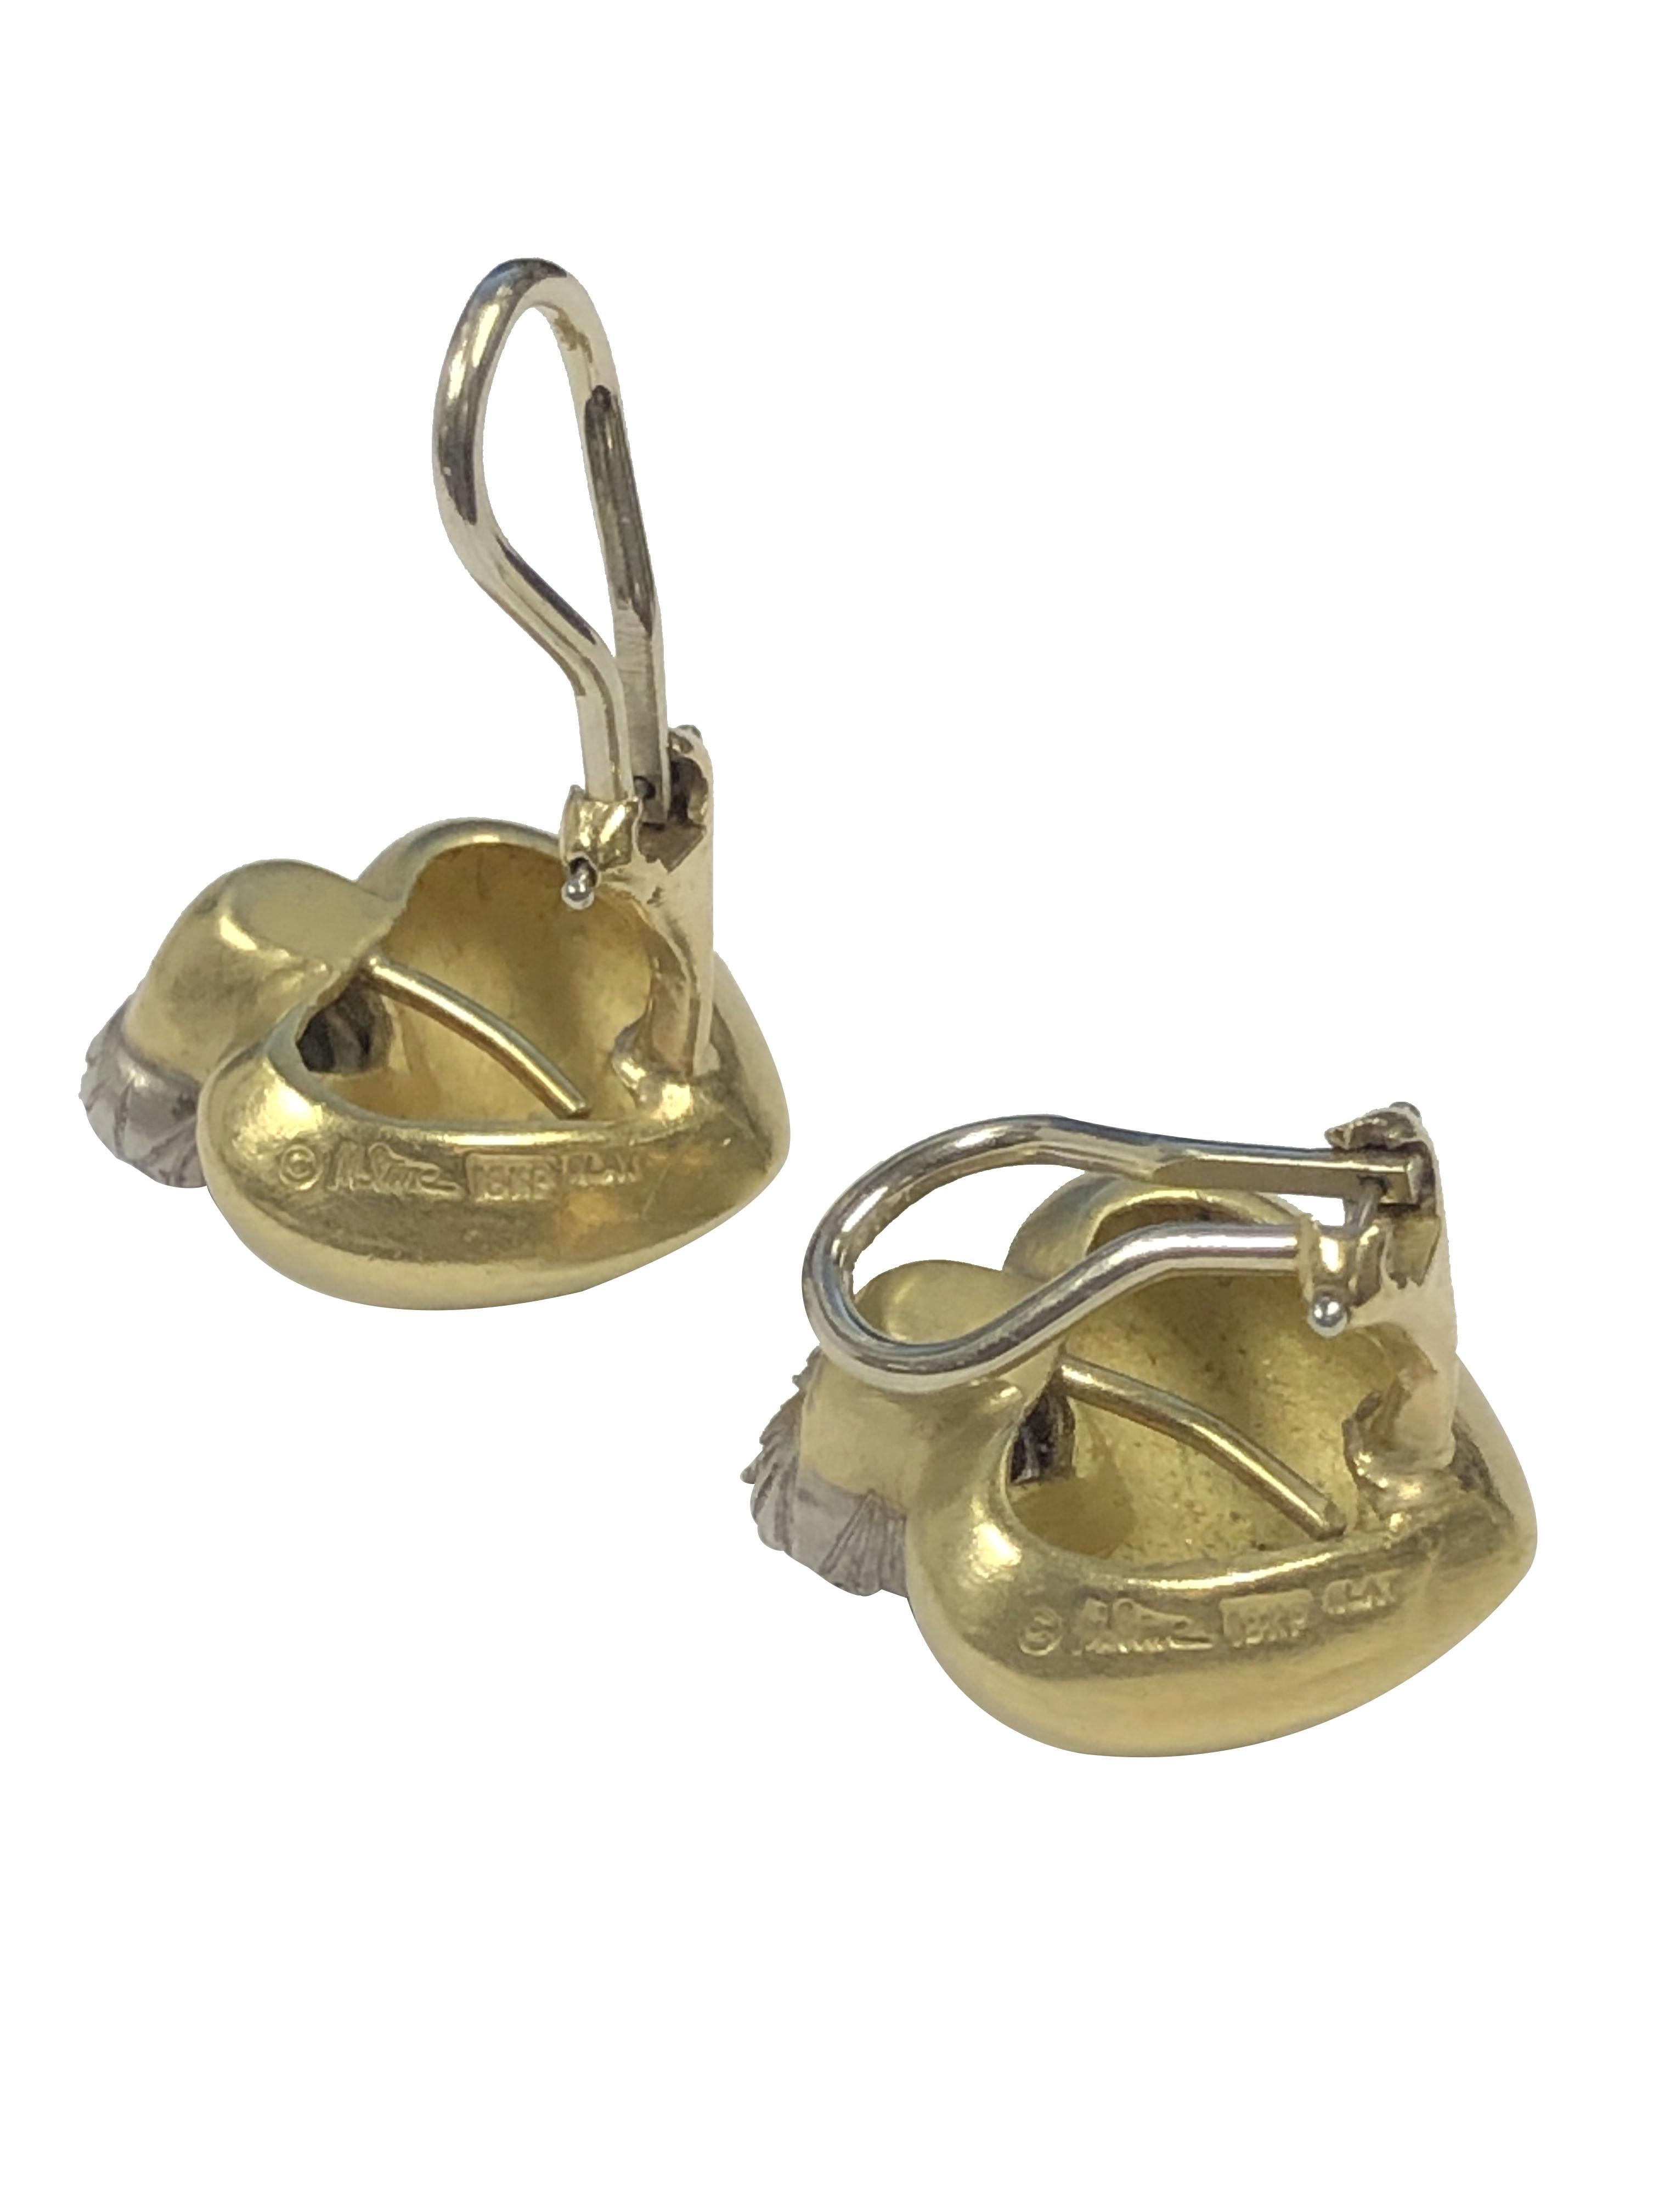 Circa 2000 Marlene Stowe 18k Yellow Gold and Platinum Heart Shaped Earrings, measuring 3/4 inch in length 5/8 inch wide and weighing 17.3 Grams, set with Round Brilliant cut Diamonds totaling 1.50 Carats. having a Light Brushed or Frosted finish,